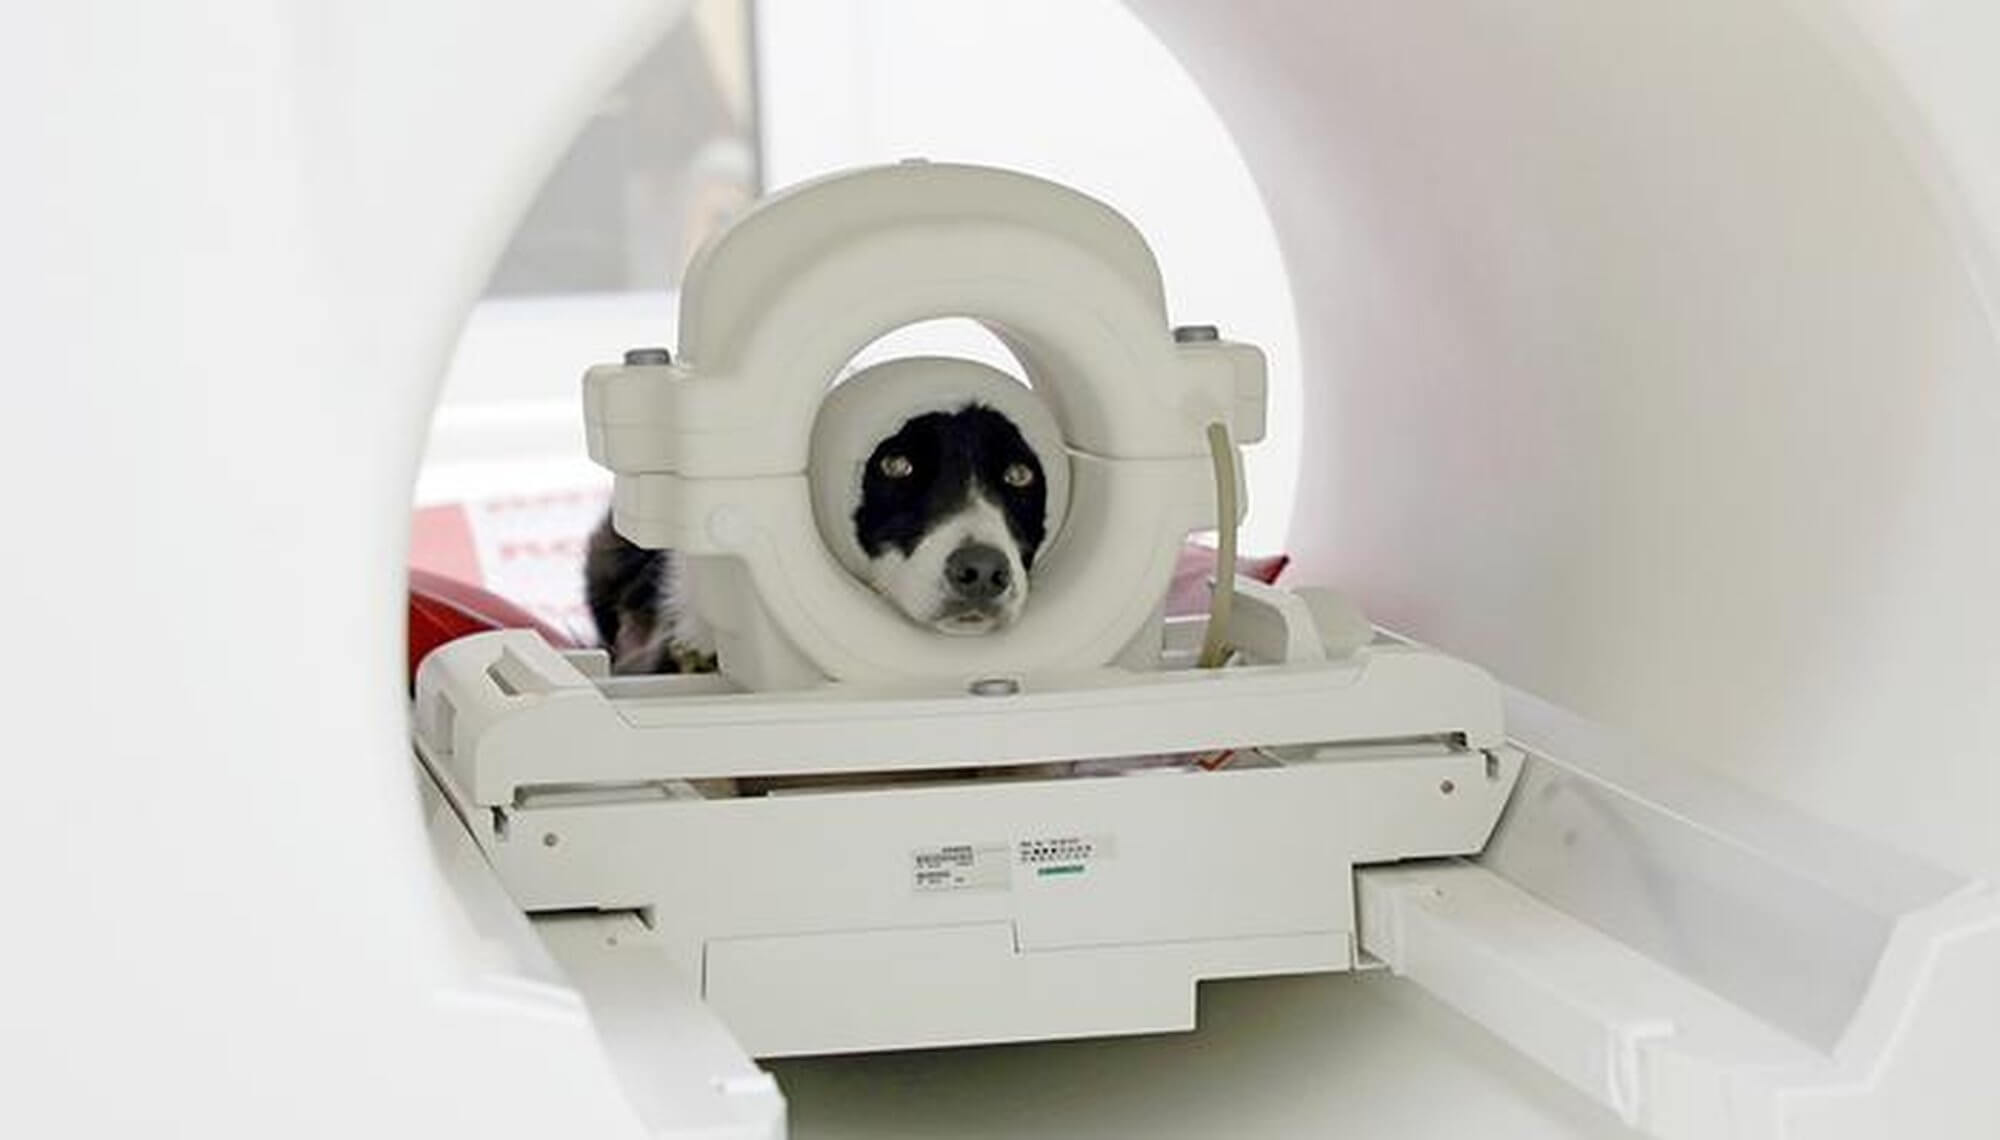 Pet dog Maeva is ready for data collection in the magnetic resonance imaging scanner. The bandage serves as an additional noise protection in combination with earplugs. 